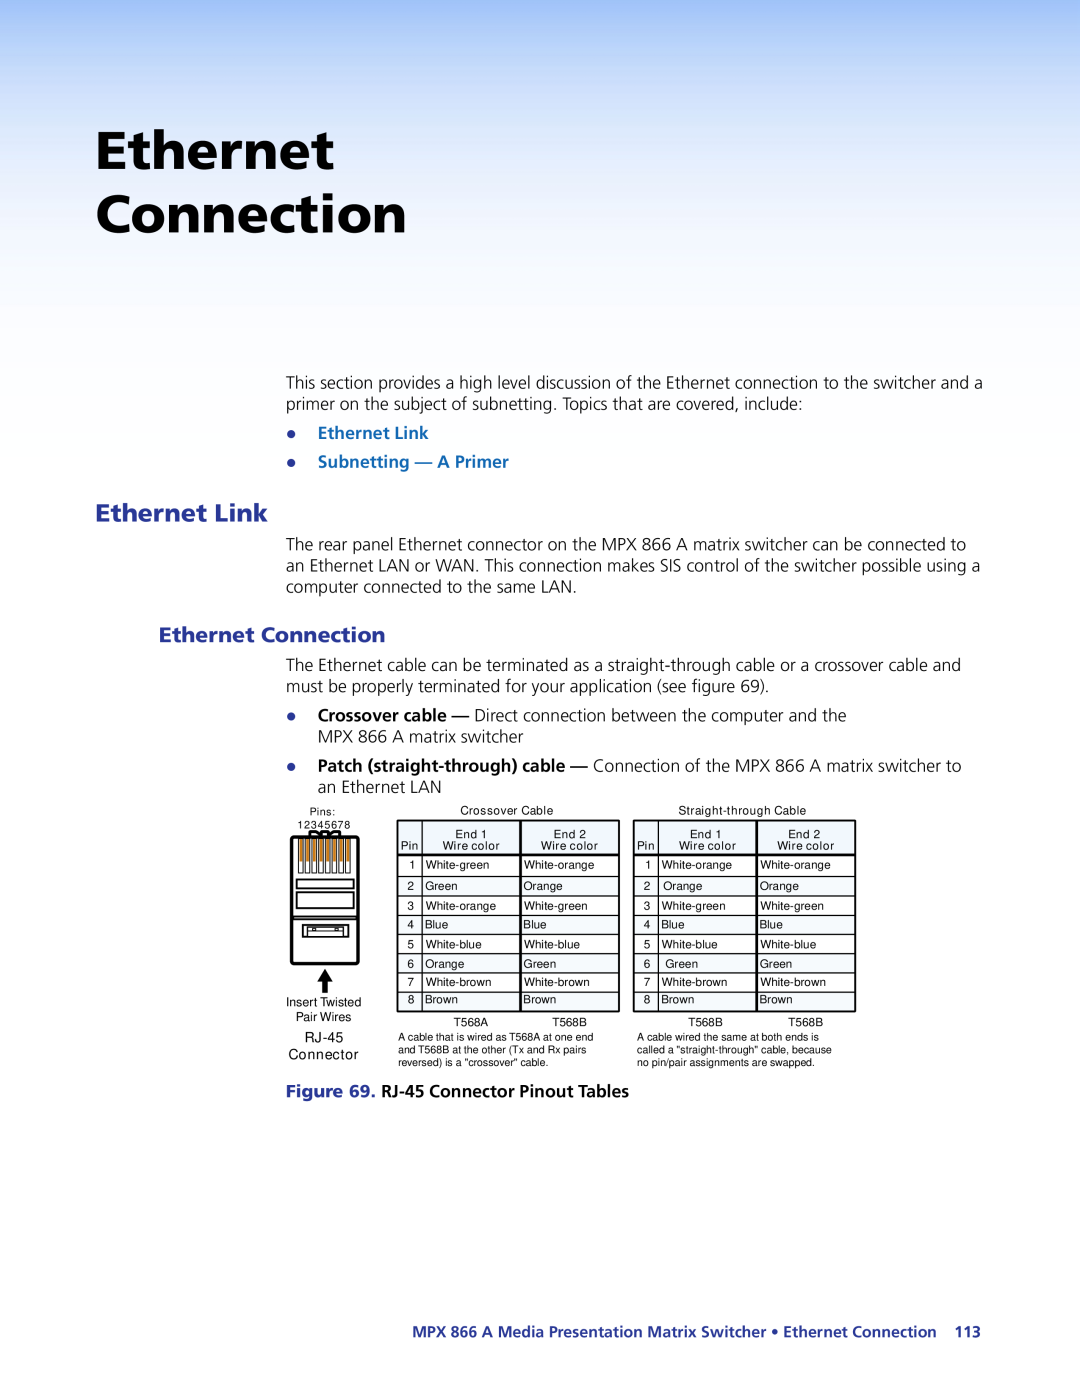 Extron electronic MPX 866 A manual Ethernet Connection, zz Ethernet Link zz Subnetting - A Primer 